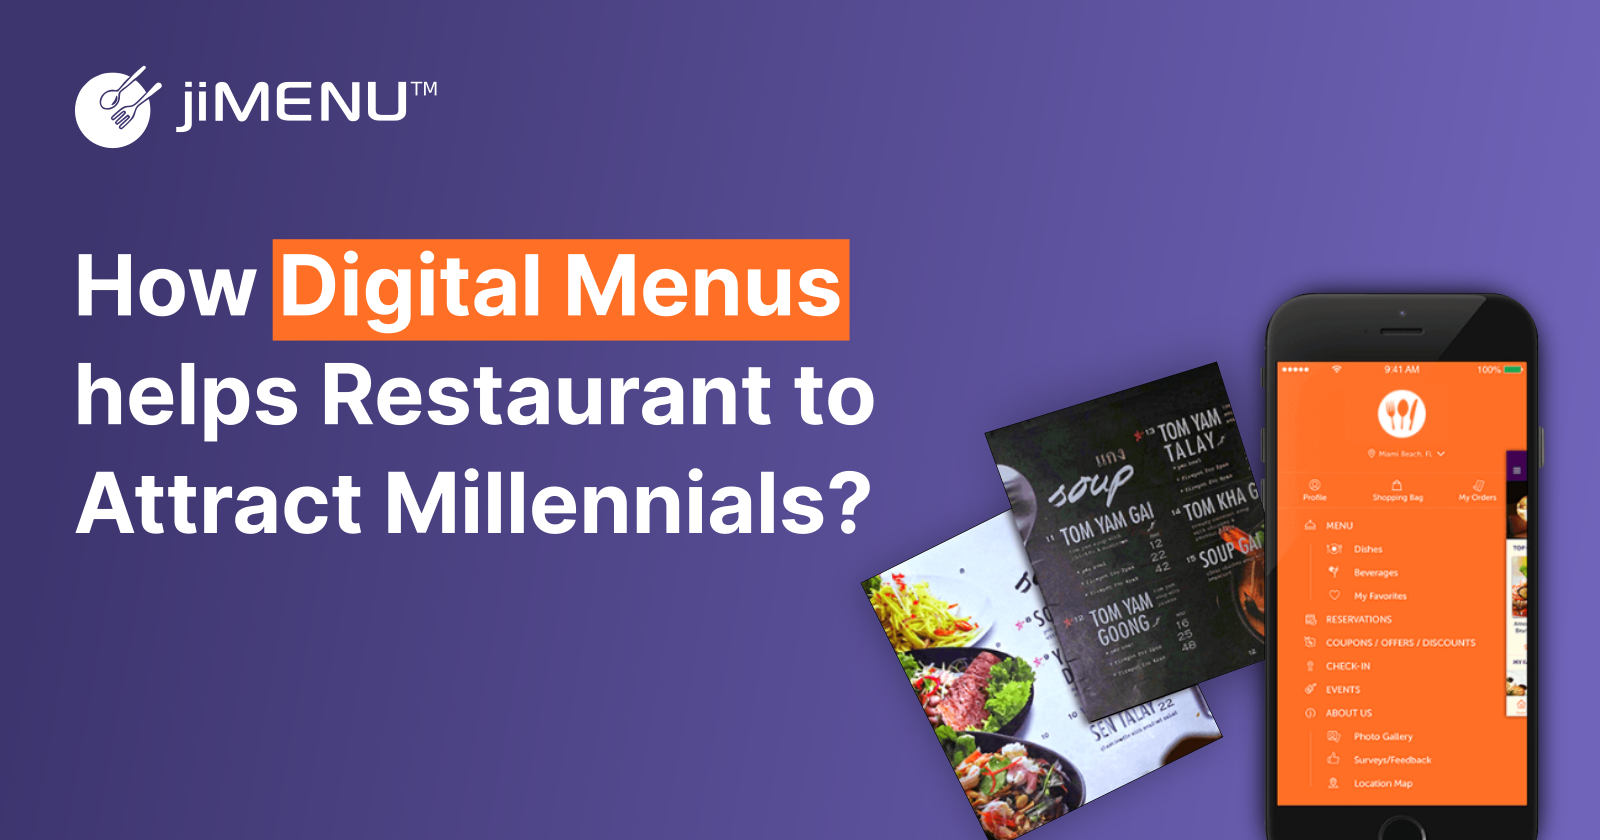 How to get the Millennials to visit your Restaurant on Regular Basis?